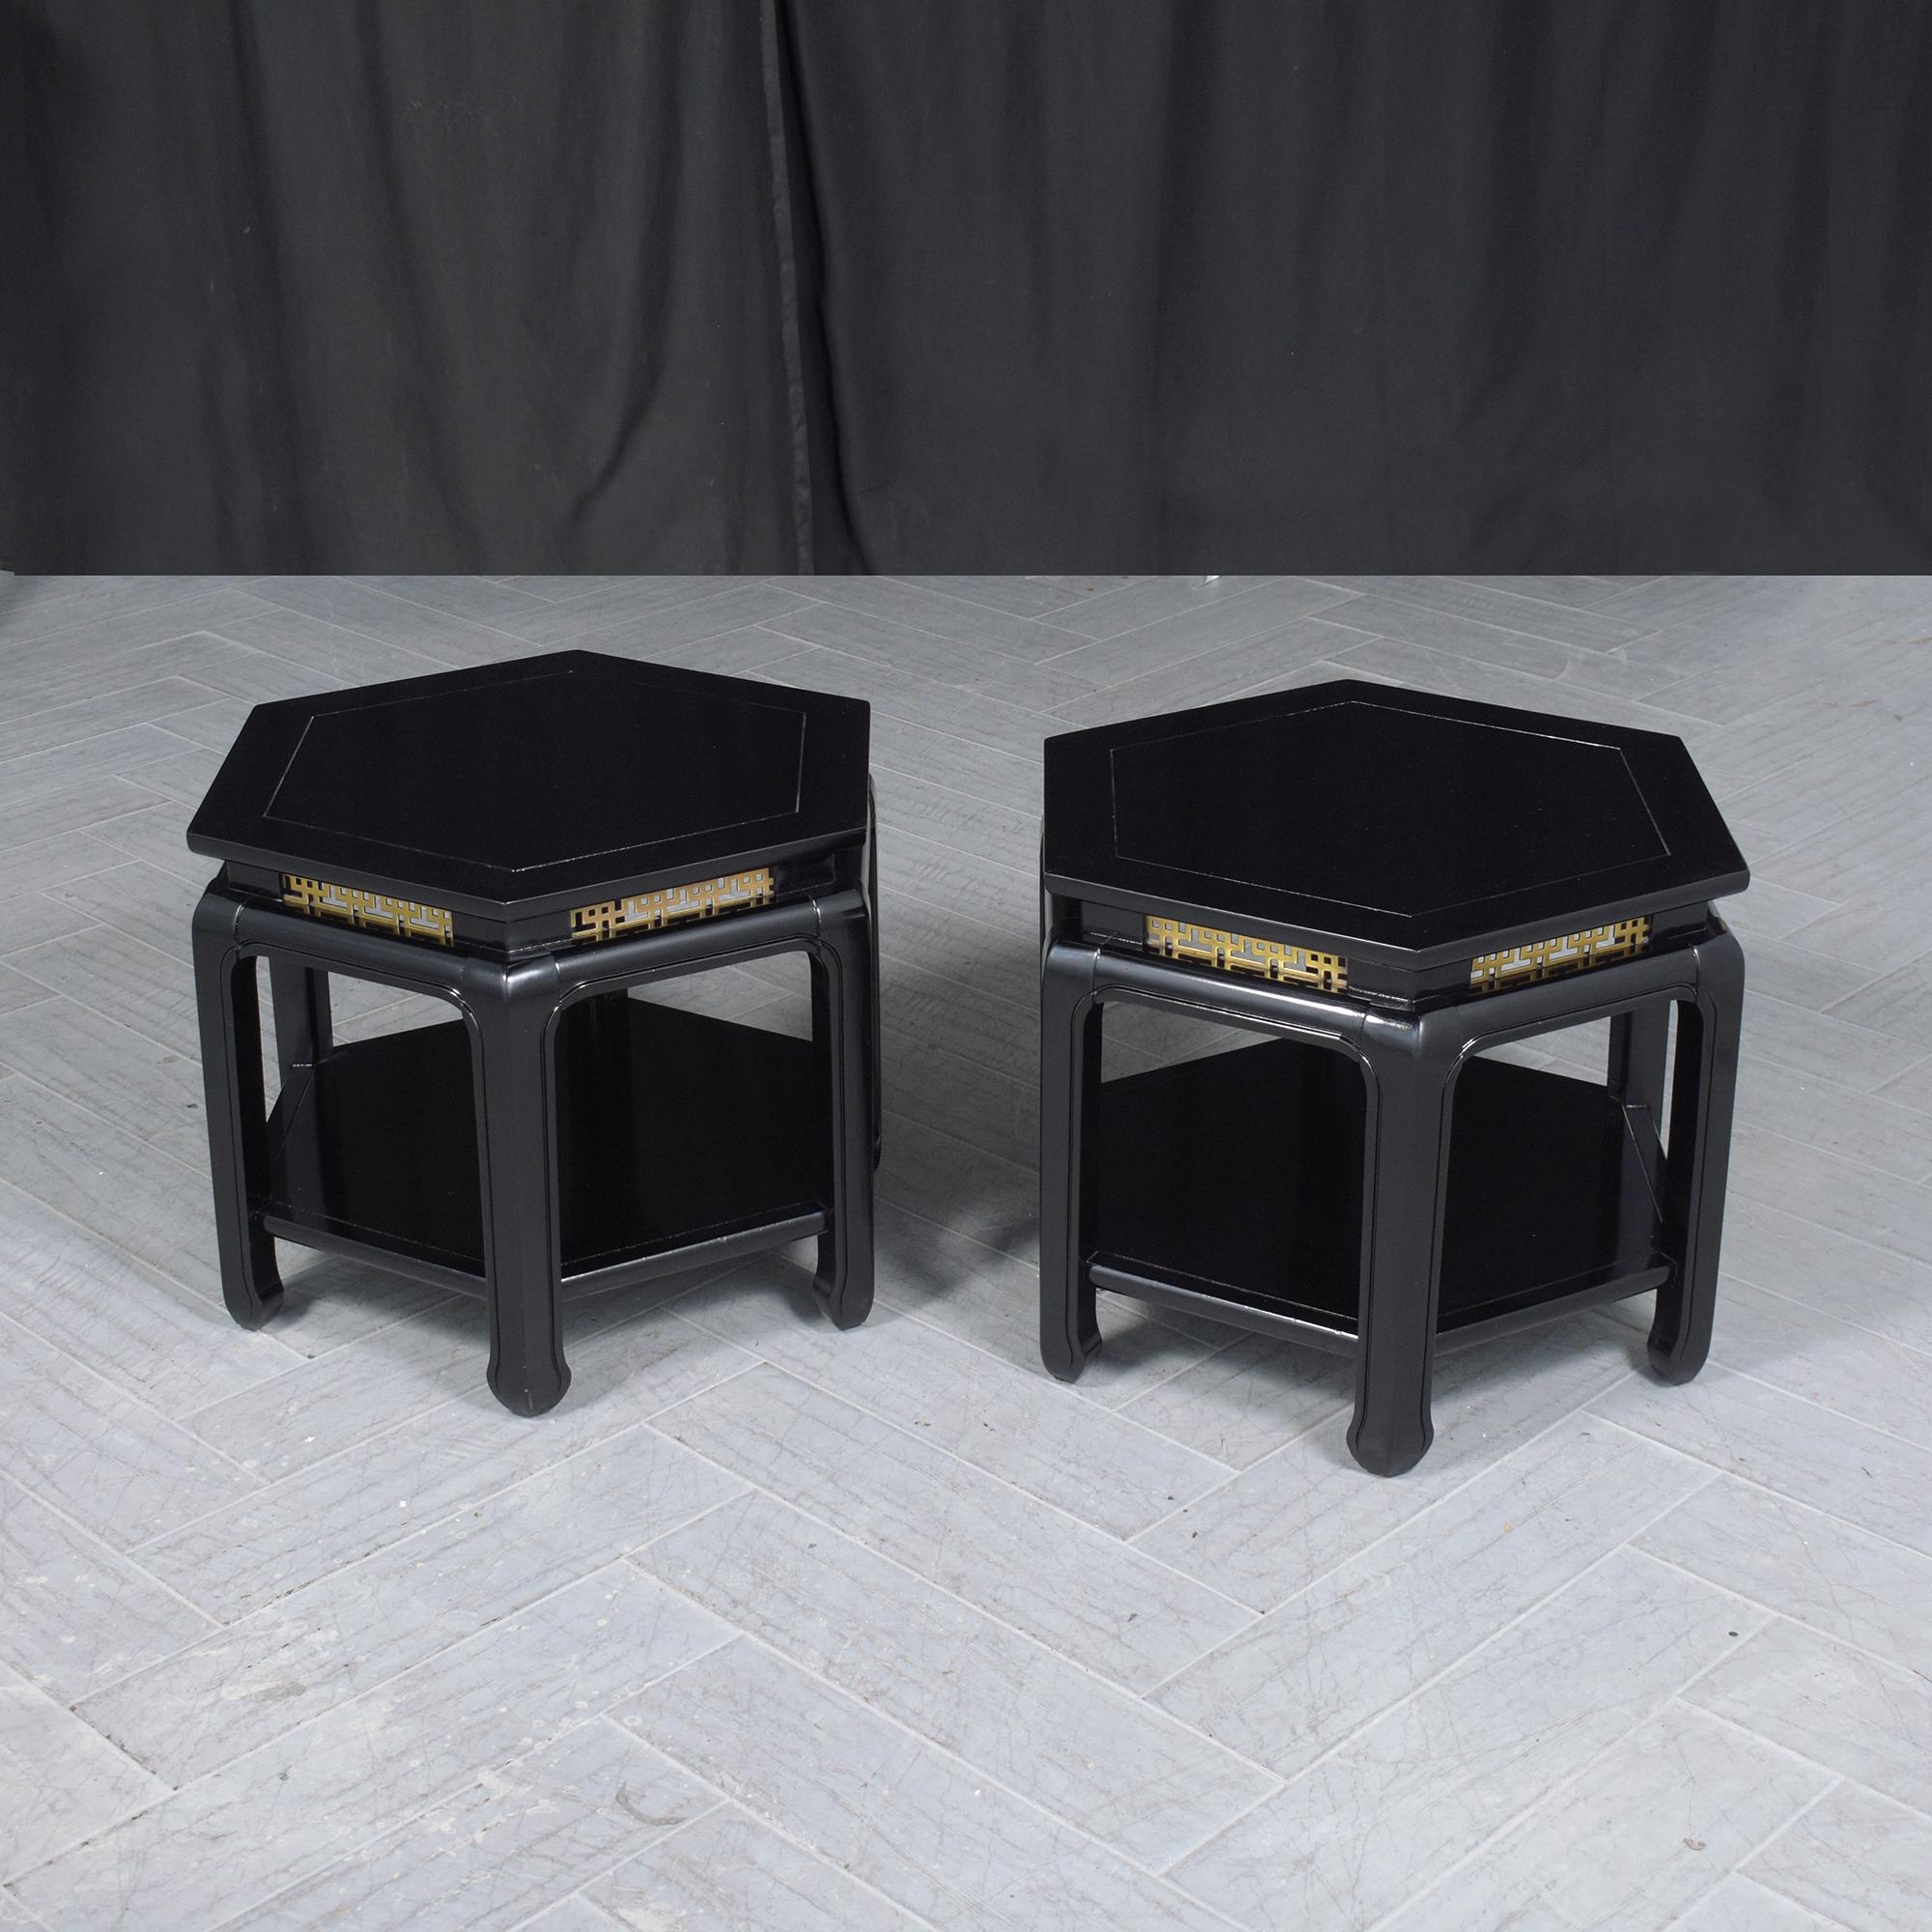 Hand-Crafted 20th Century Hexagon Ebonized Mahogany Side Tables by J.B. Van Sciver Co. For Sale